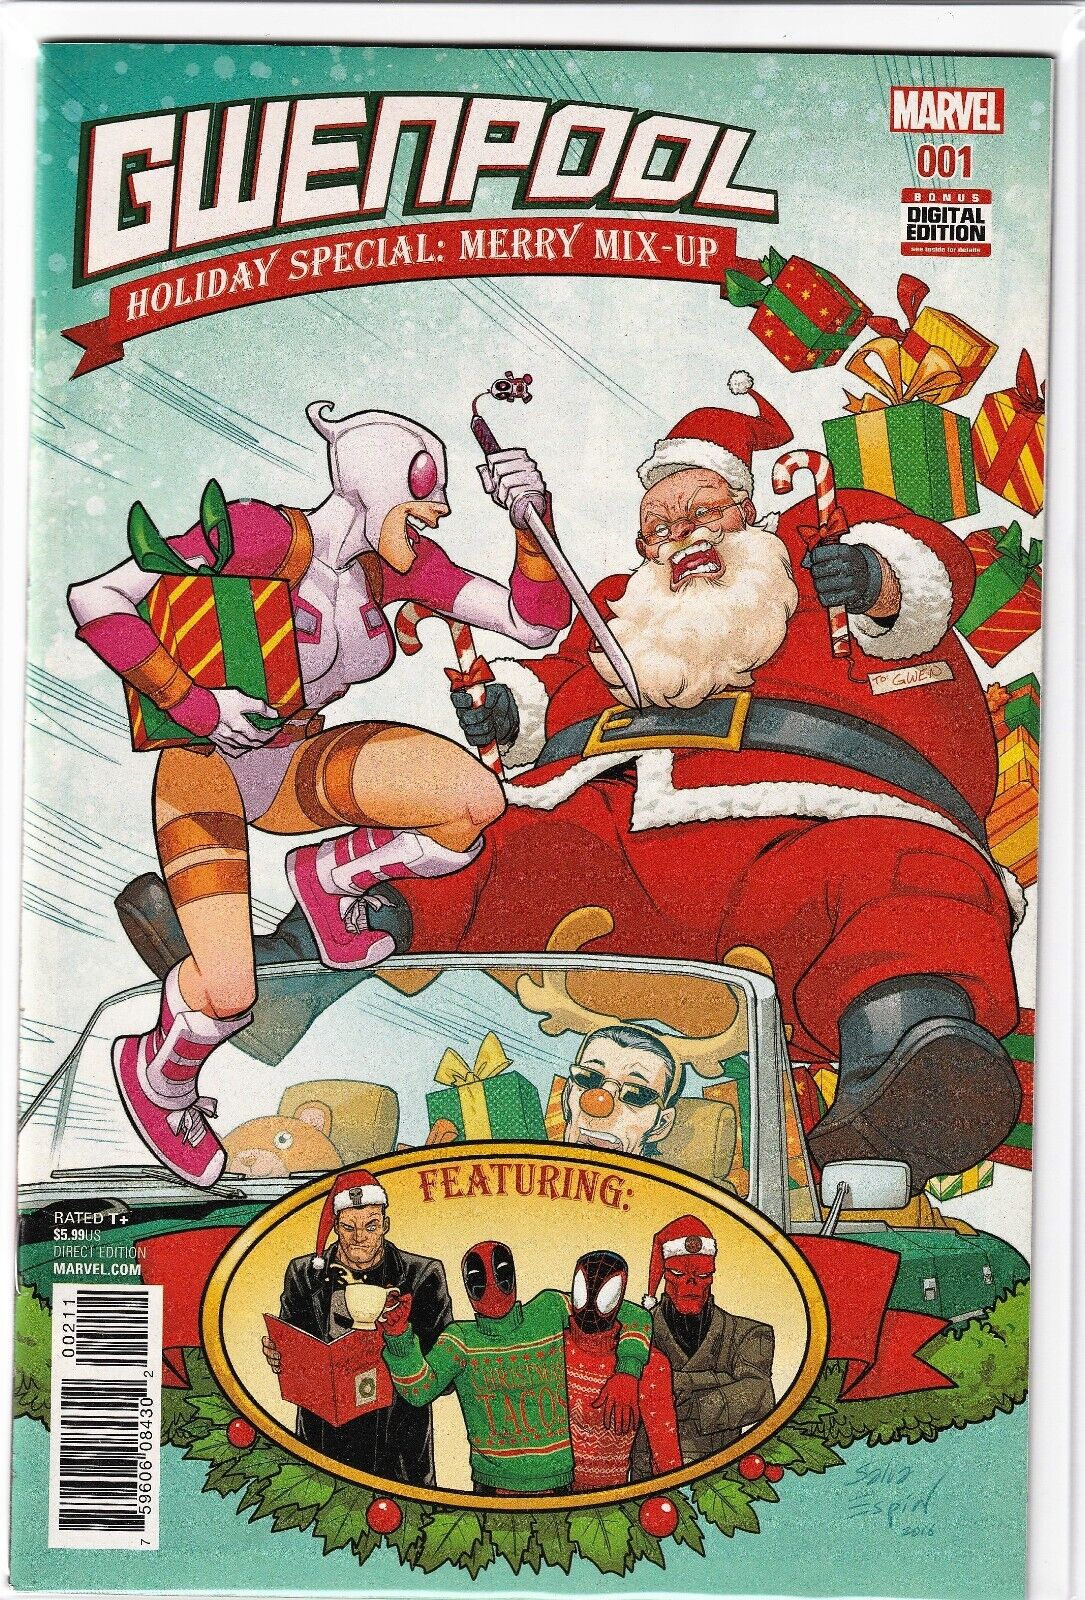 GWENPOOL HOLIDAY SPECIAL MERRY MIX-UP #1 (2016) SALVA ESPIN VARIANT ~ UNREAD NM